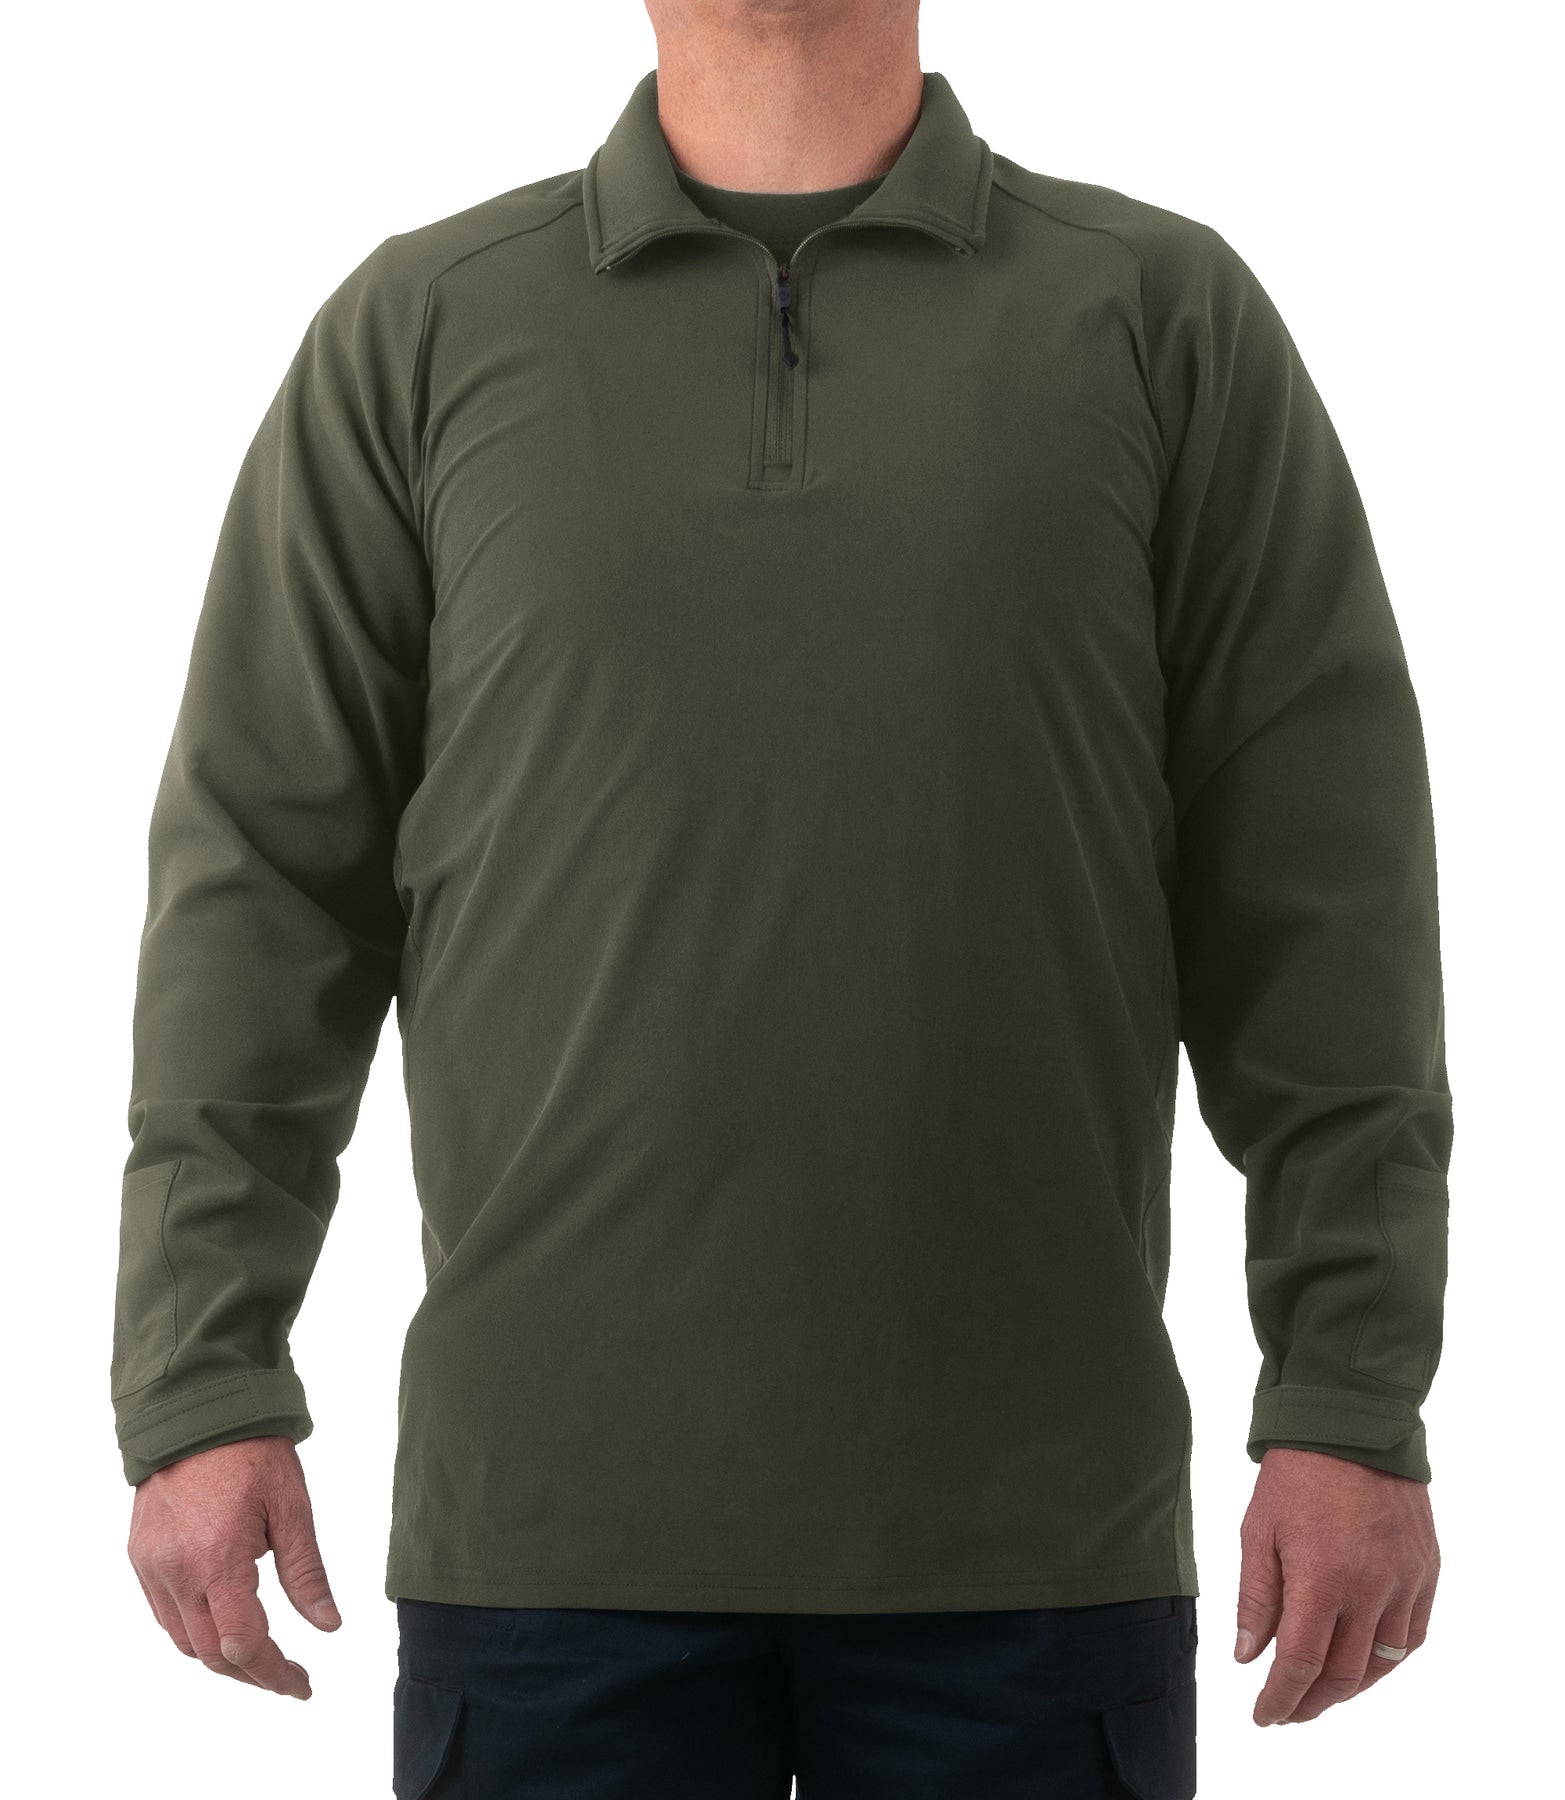 Men's Pro Duty Pullover – First Tactical